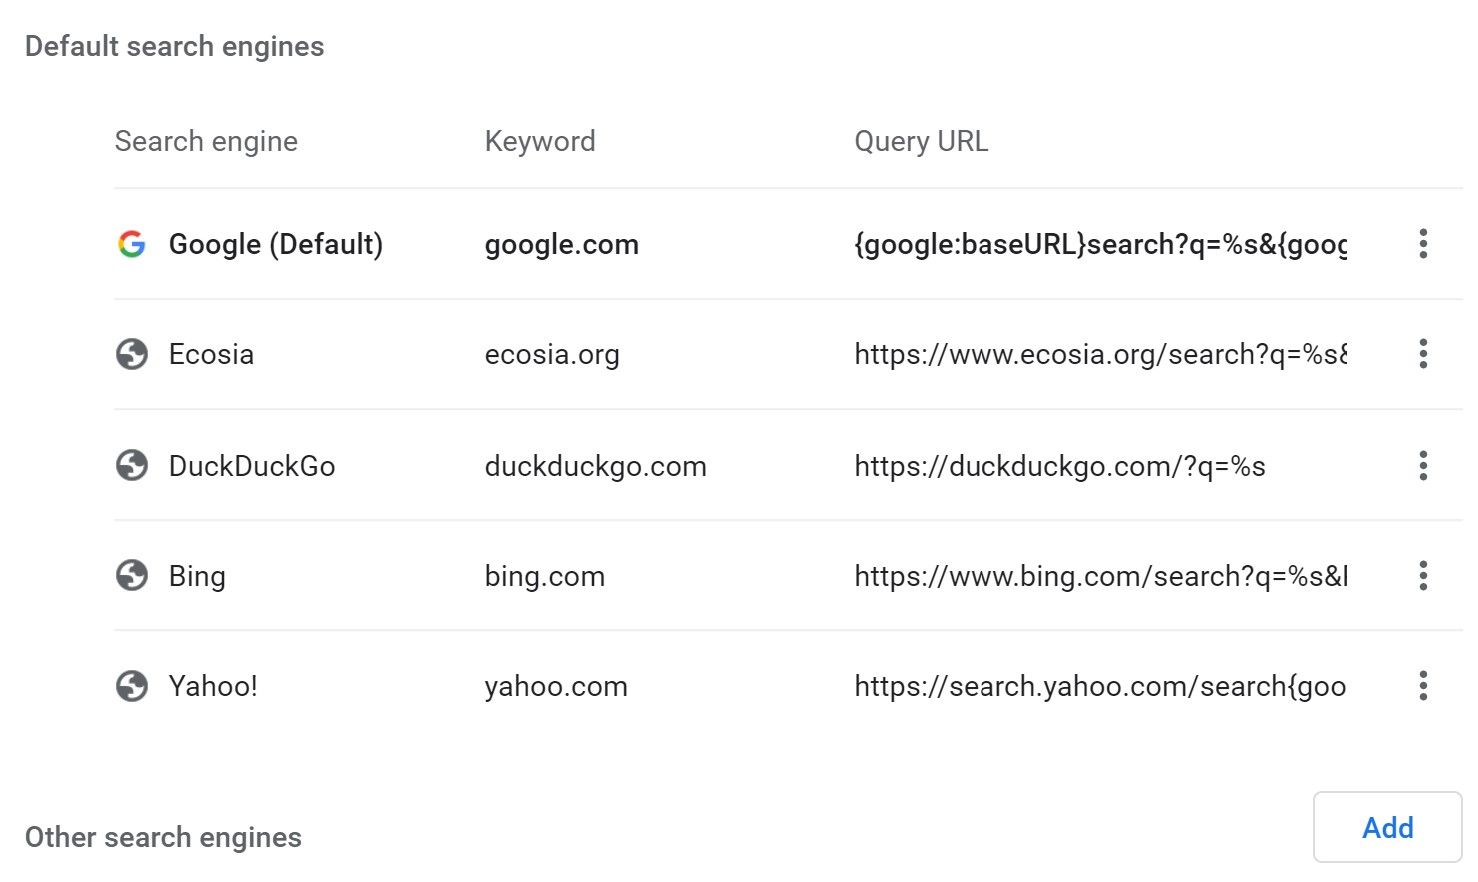 The list of search engines in Google Chrome